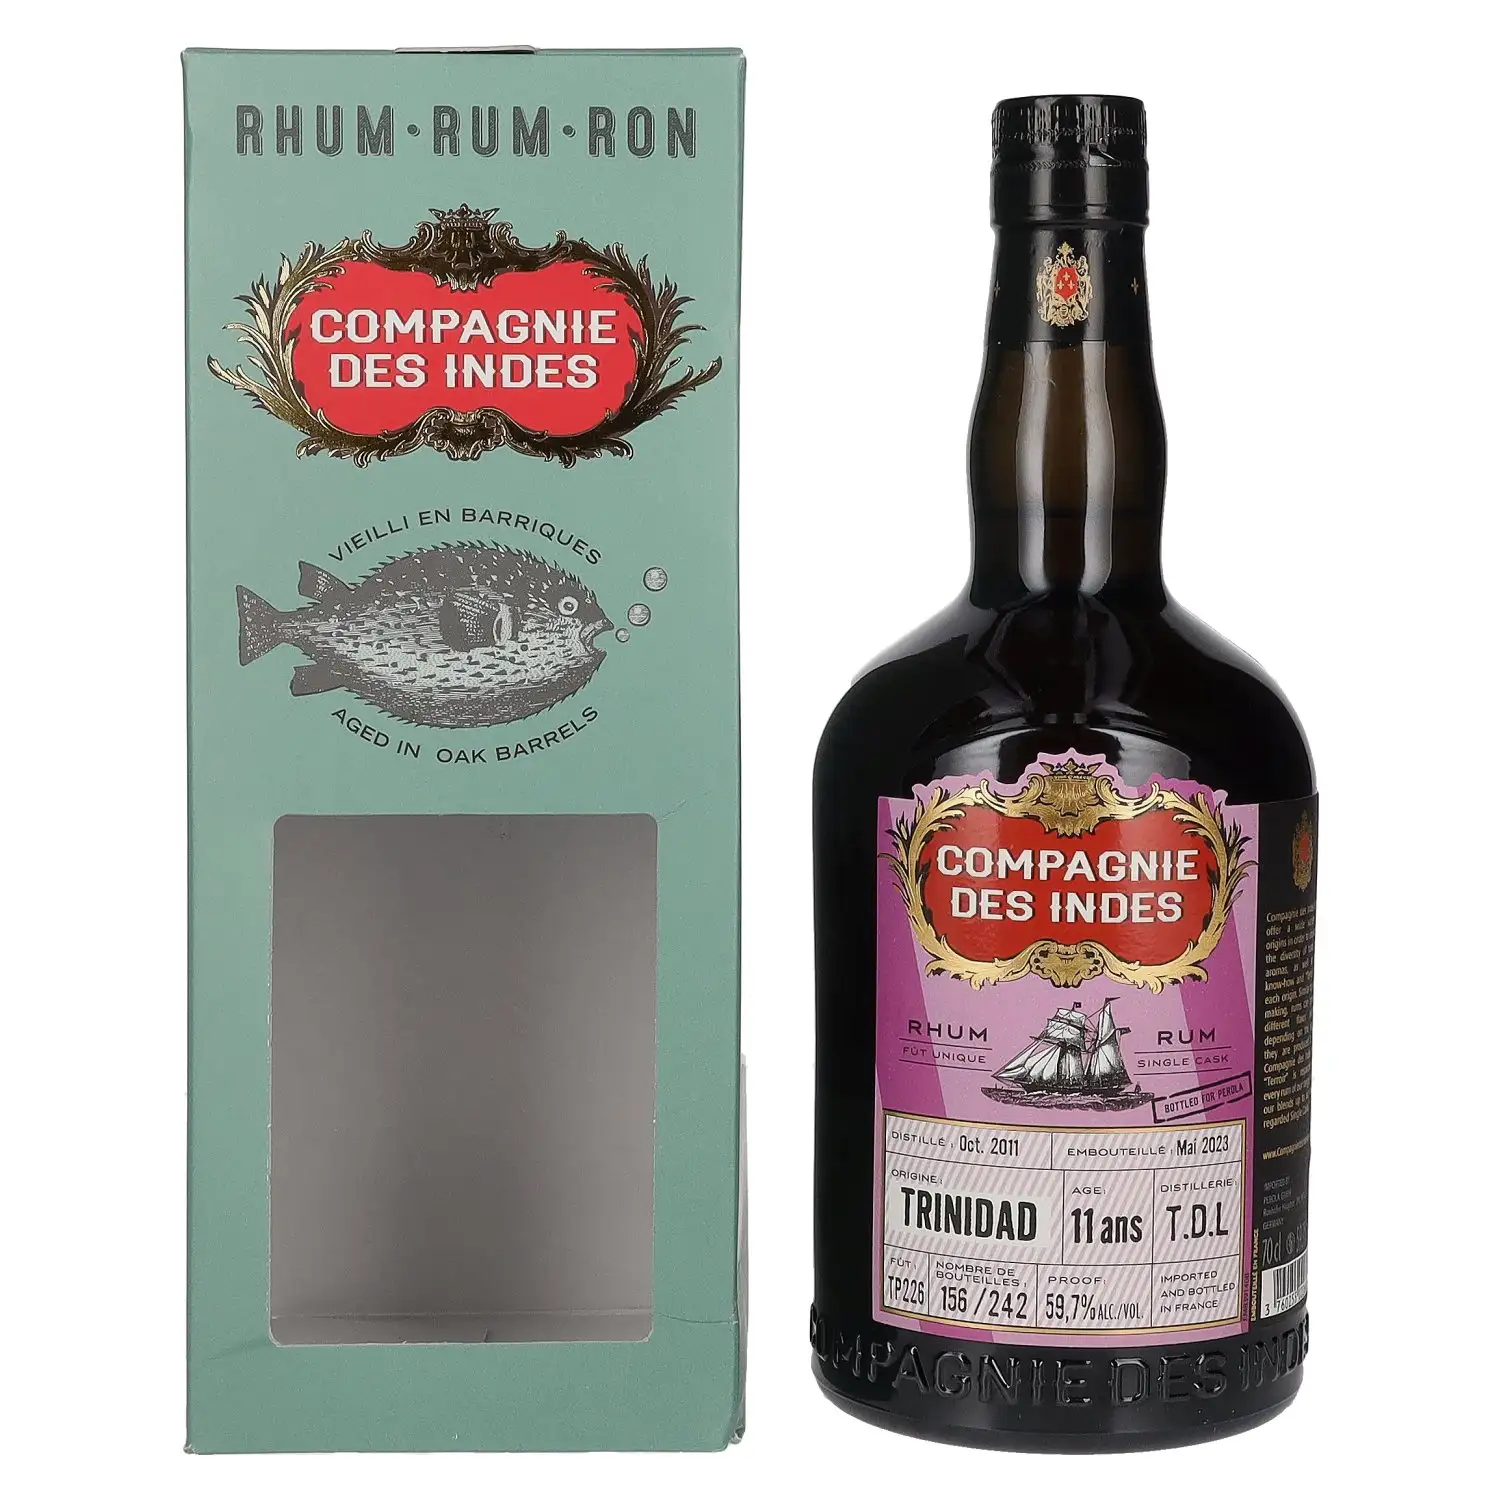 Image of the front of the bottle of the rum Trinidad (Bottled for Perola)